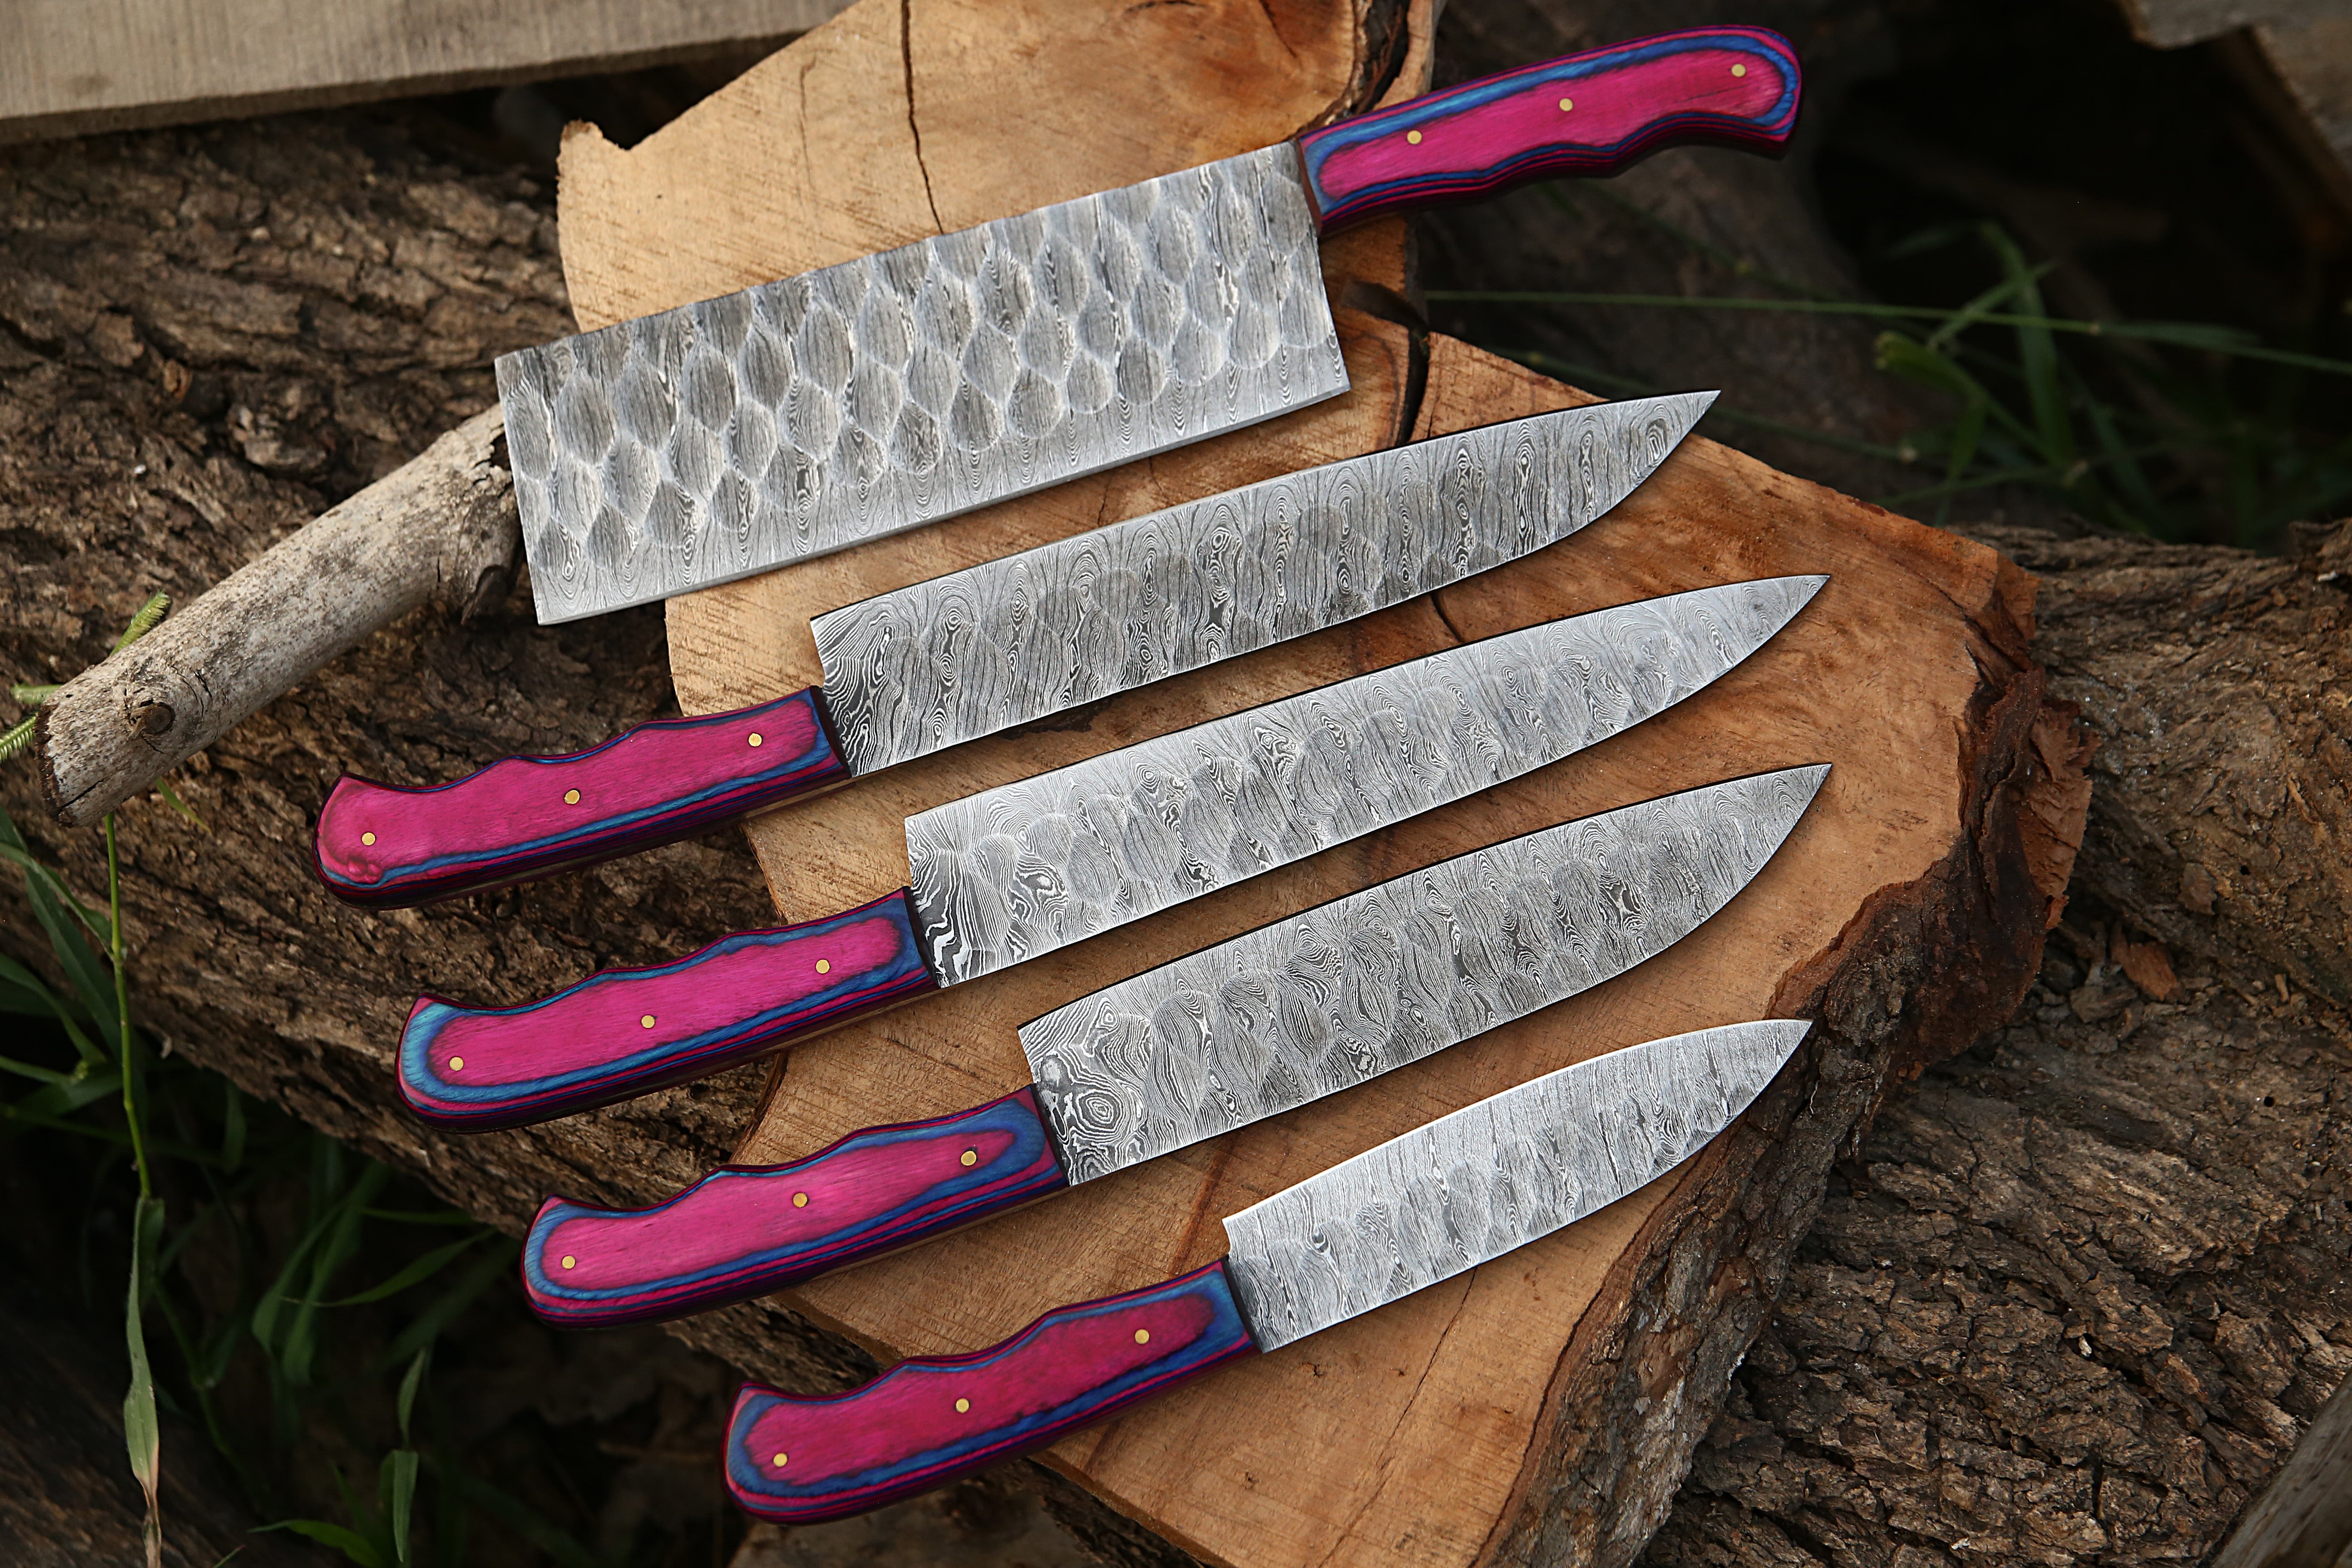 Handmade Damascus Steel Kitchen Knife Set Of 5 PCS Multi Color Dollar Handle Chef Knife With Leather Roll Kit.